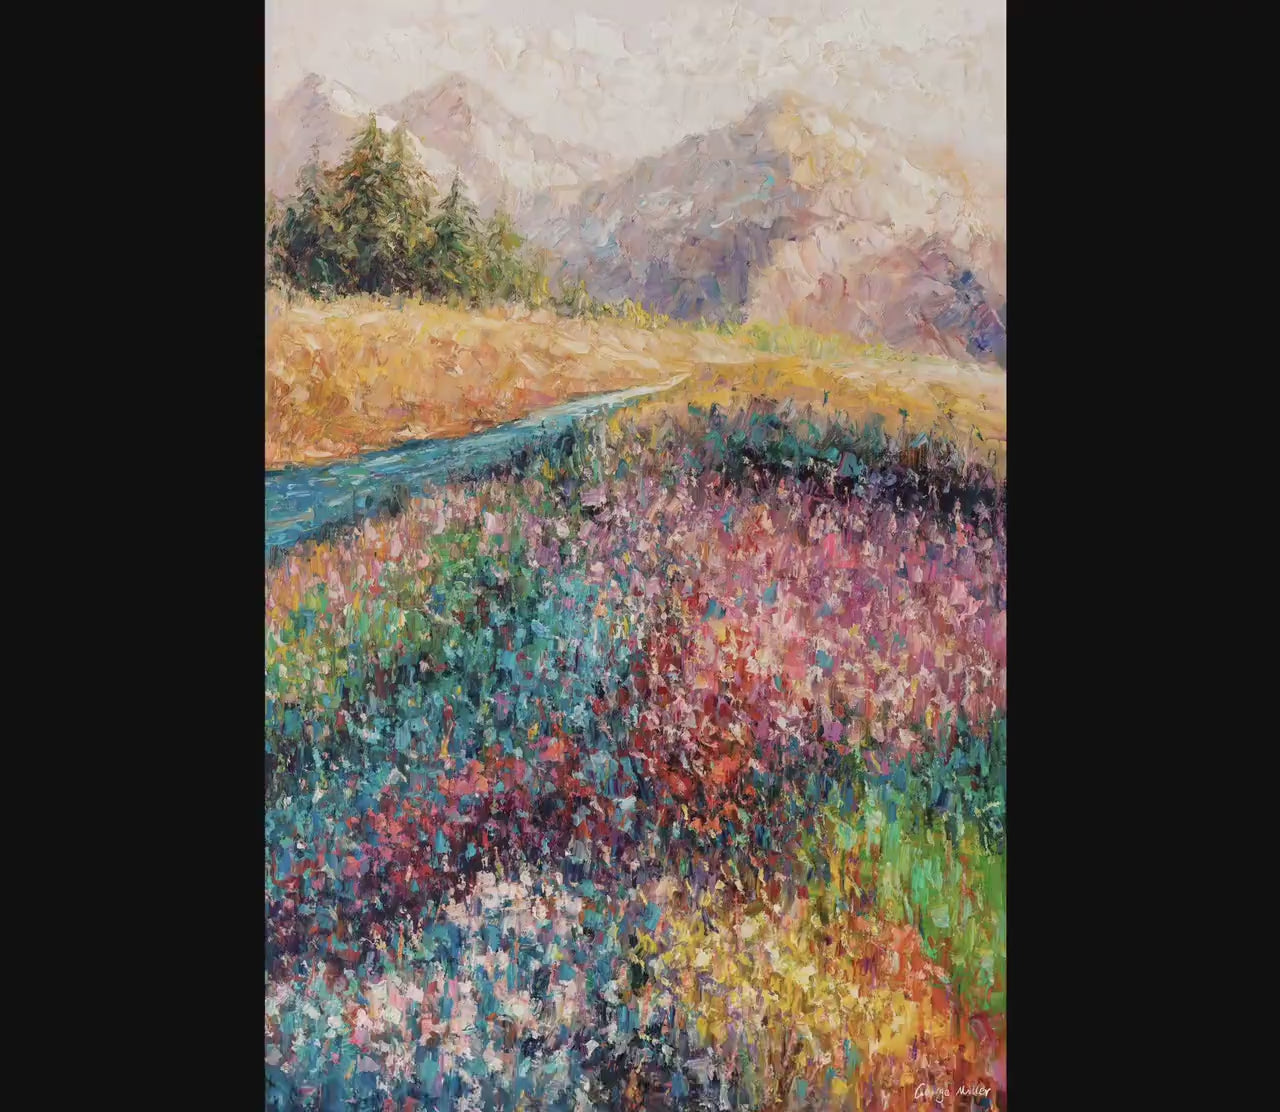 Oil Painting Mountain With Wild Flowers Spring, Landscape Wall Art, Oversized Wall Art, Rustic Oil Painting, Textured Painting New Home Gift